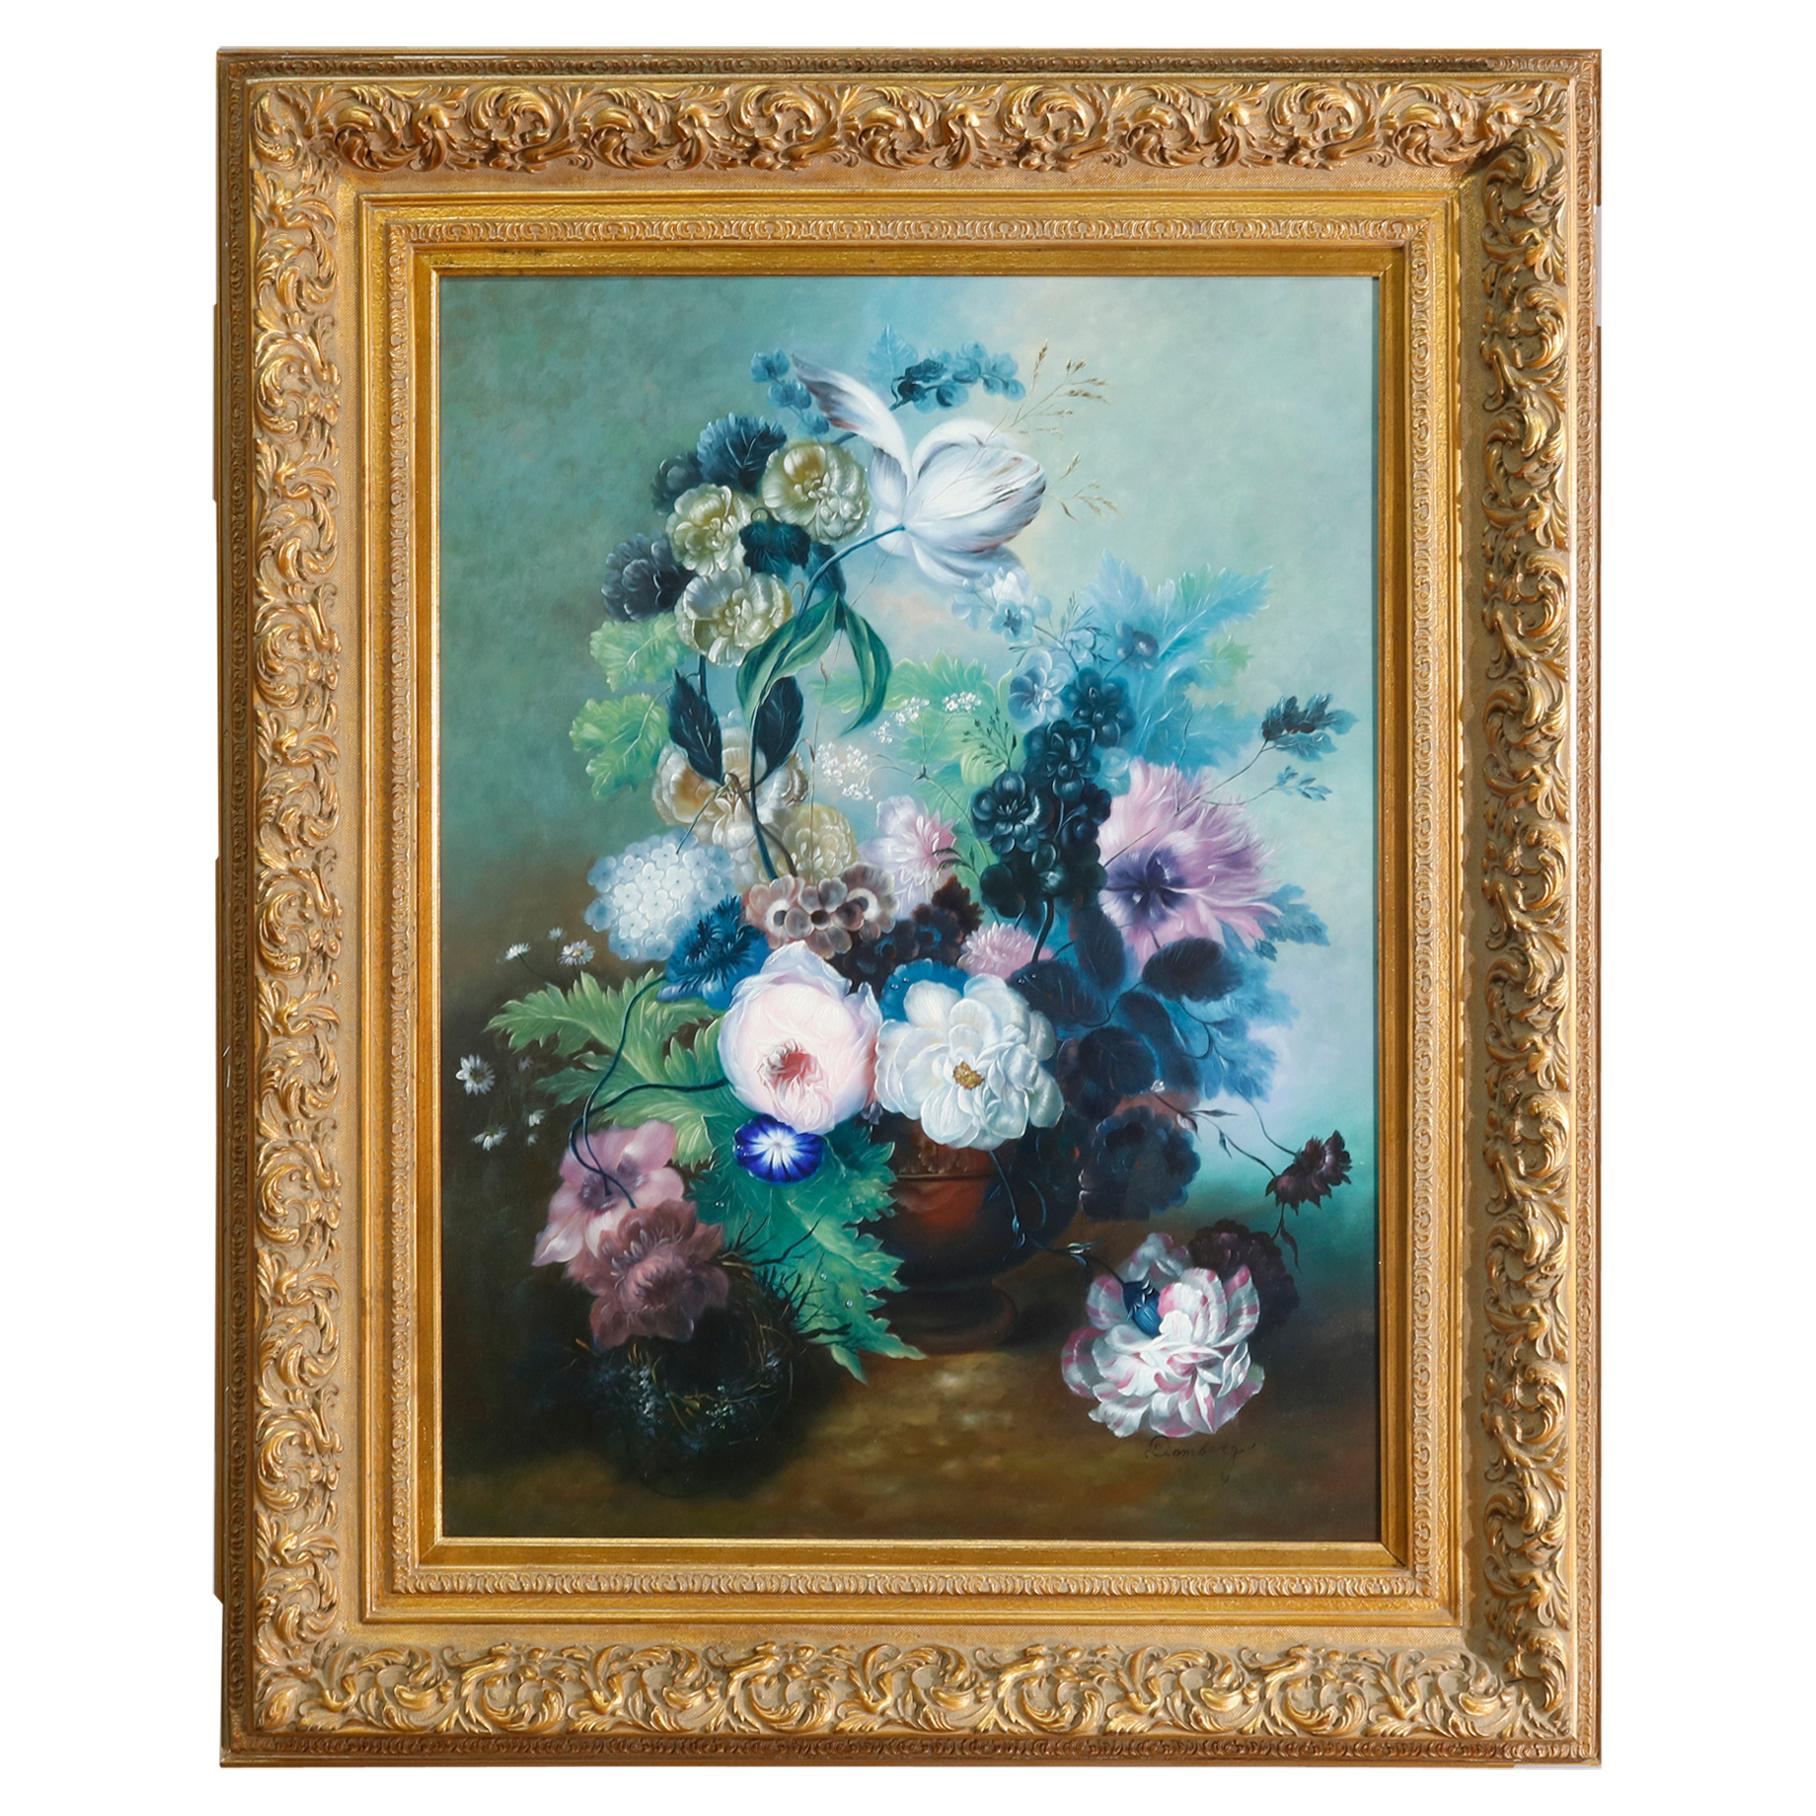 Vintage Oversized Floral Still Life Oil on Canvas Painting of Roses 20th Century